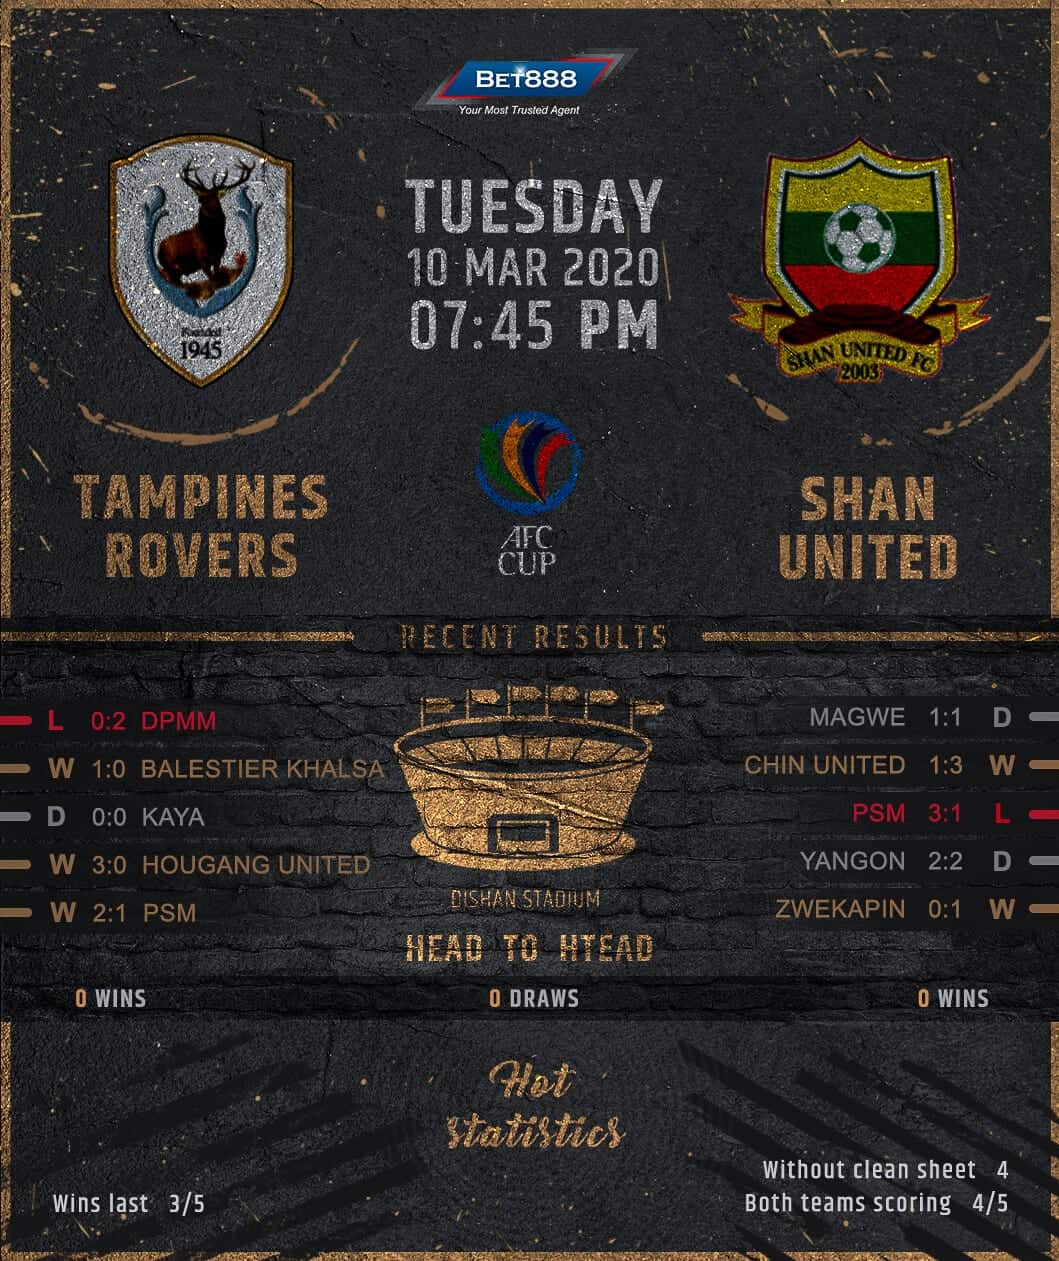 Tampines Rovers vs Shan United﻿ 10/03/20